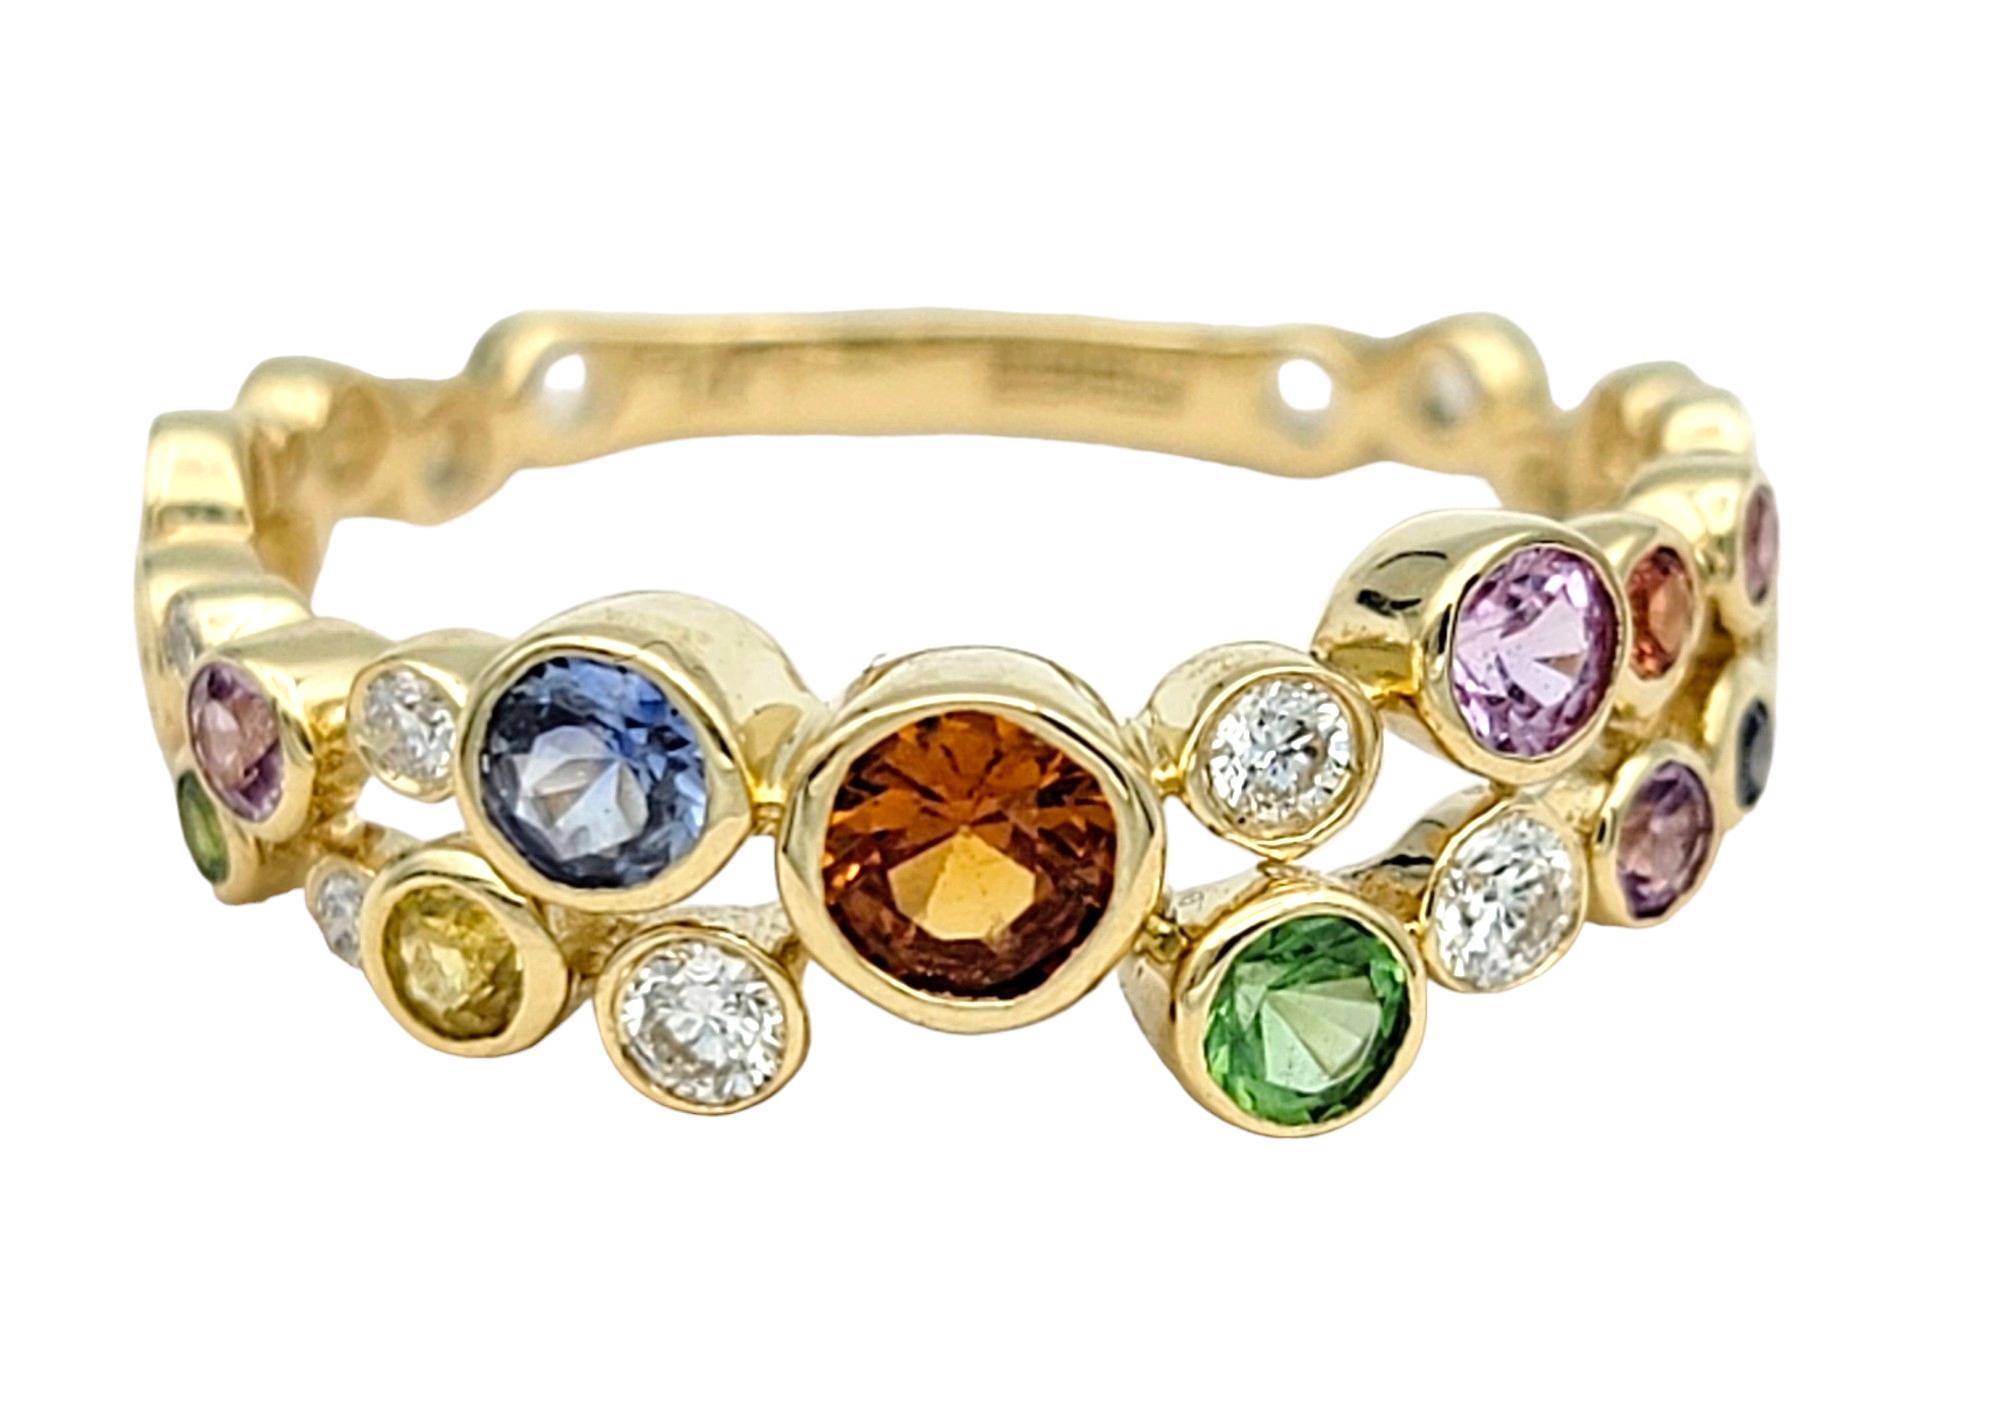 Ring Size: 7

This beautiful Effy band ring showcases an array of vibrant multi-colored gemstones set in lustrous 14 karat yellow gold. Each gemstone, with its unique hue and brilliance, adds a dynamic burst of color to the piece, creating a